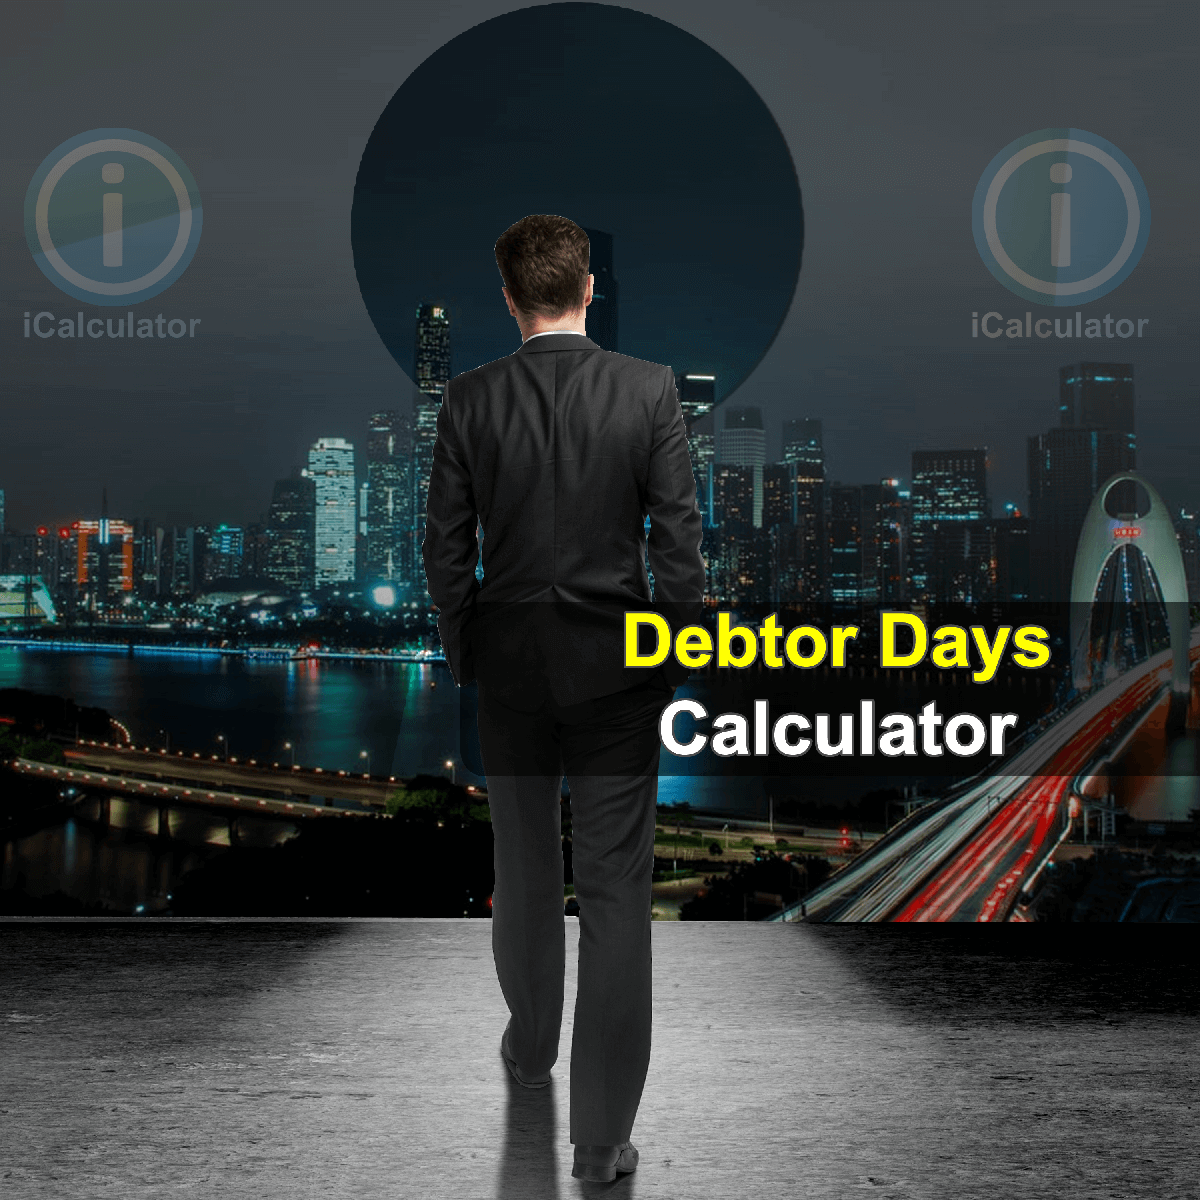 Debtor Days Calculator. This image provides details of how to calculate the debtor days using and maintaining a car using a calculator and notepad. By using the debt formula, the Debtor Days Calculator provides a true calculation of the average number of days it takes to collect payments after sales have been made by a company.